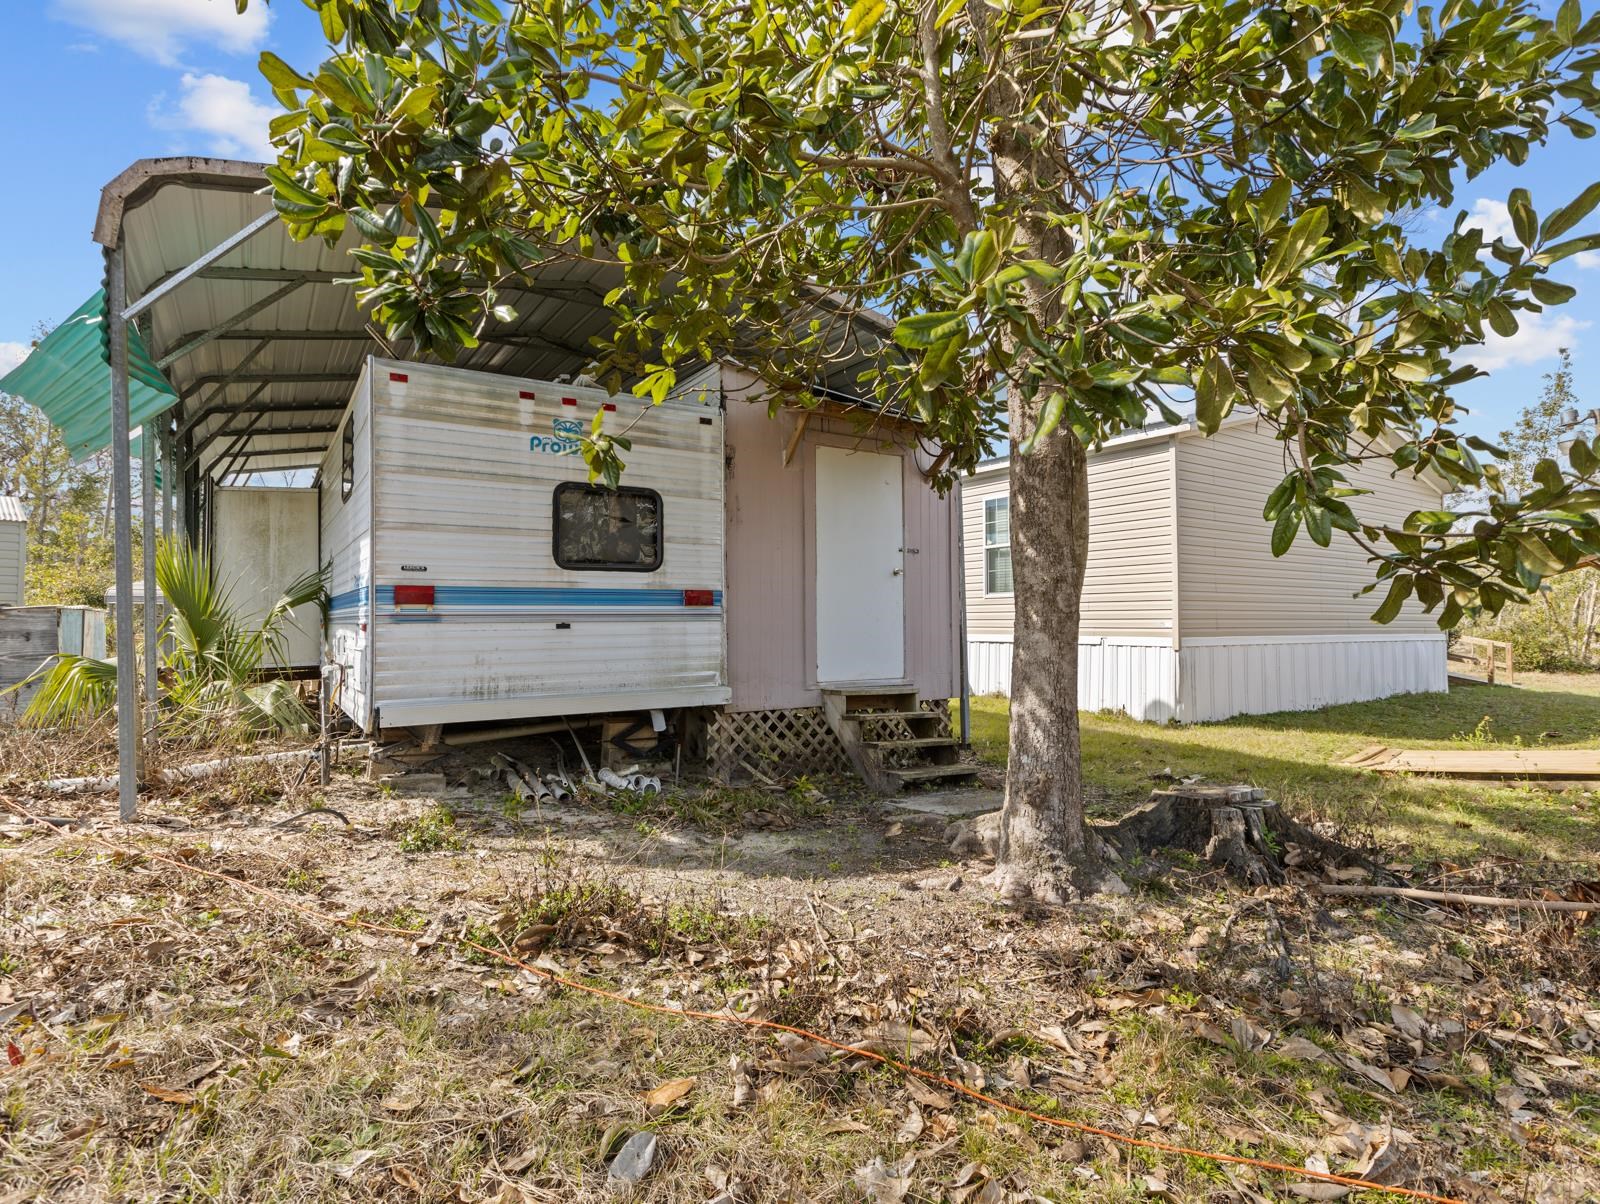 11230 W Woodland Drive,PERRY,Florida 32348,3 Bedrooms Bedrooms,2 BathroomsBathrooms,Manuf/mobile home,11230 W Woodland Drive,368417